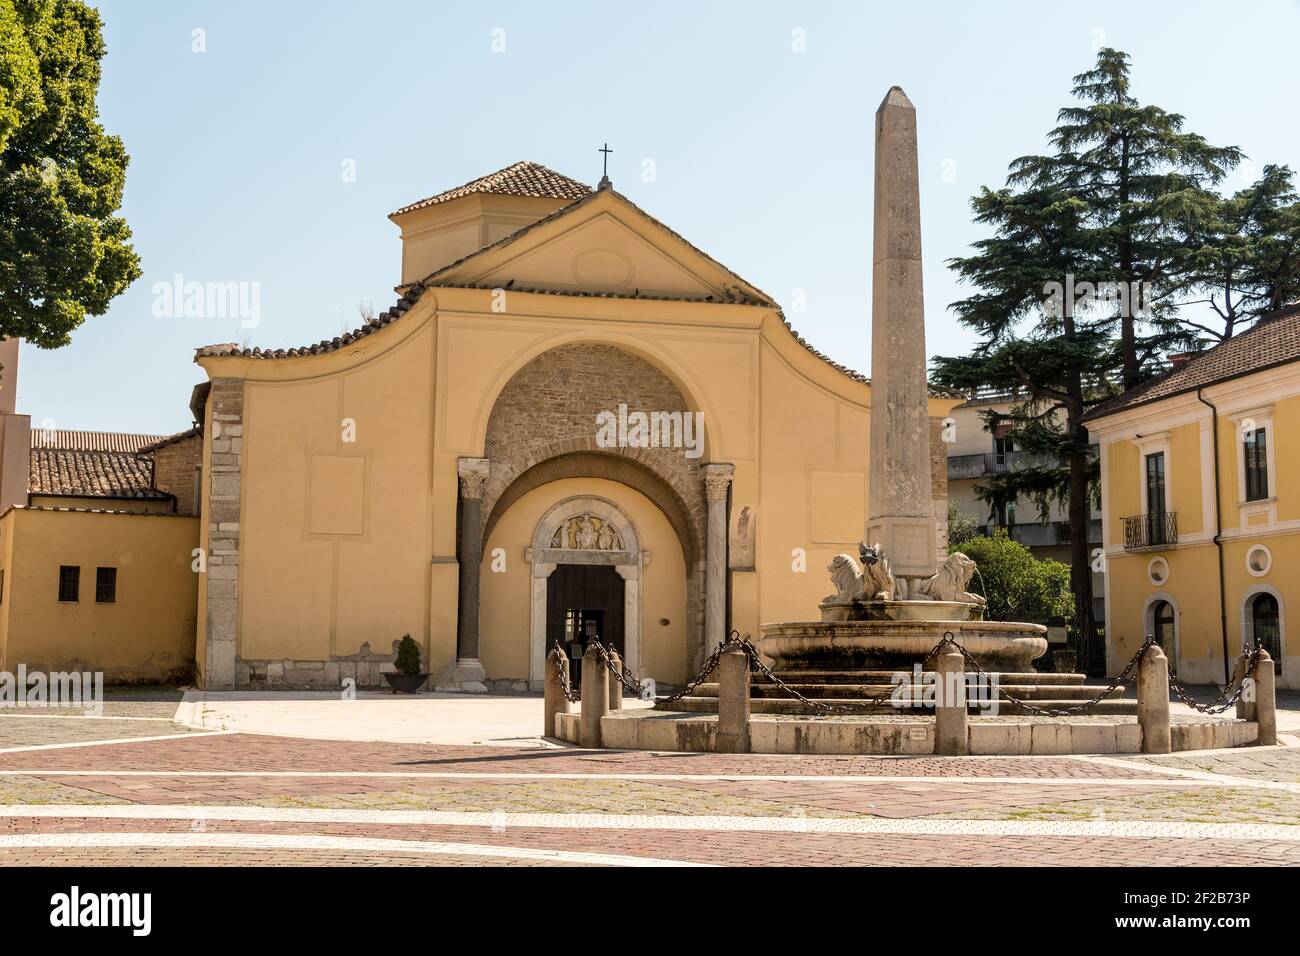 Santa Sofia is a Roman Catholic church in the town of Benevento, in the region of Campania, in southern Italy; founded in the late-8th century, it ret Stock Photo